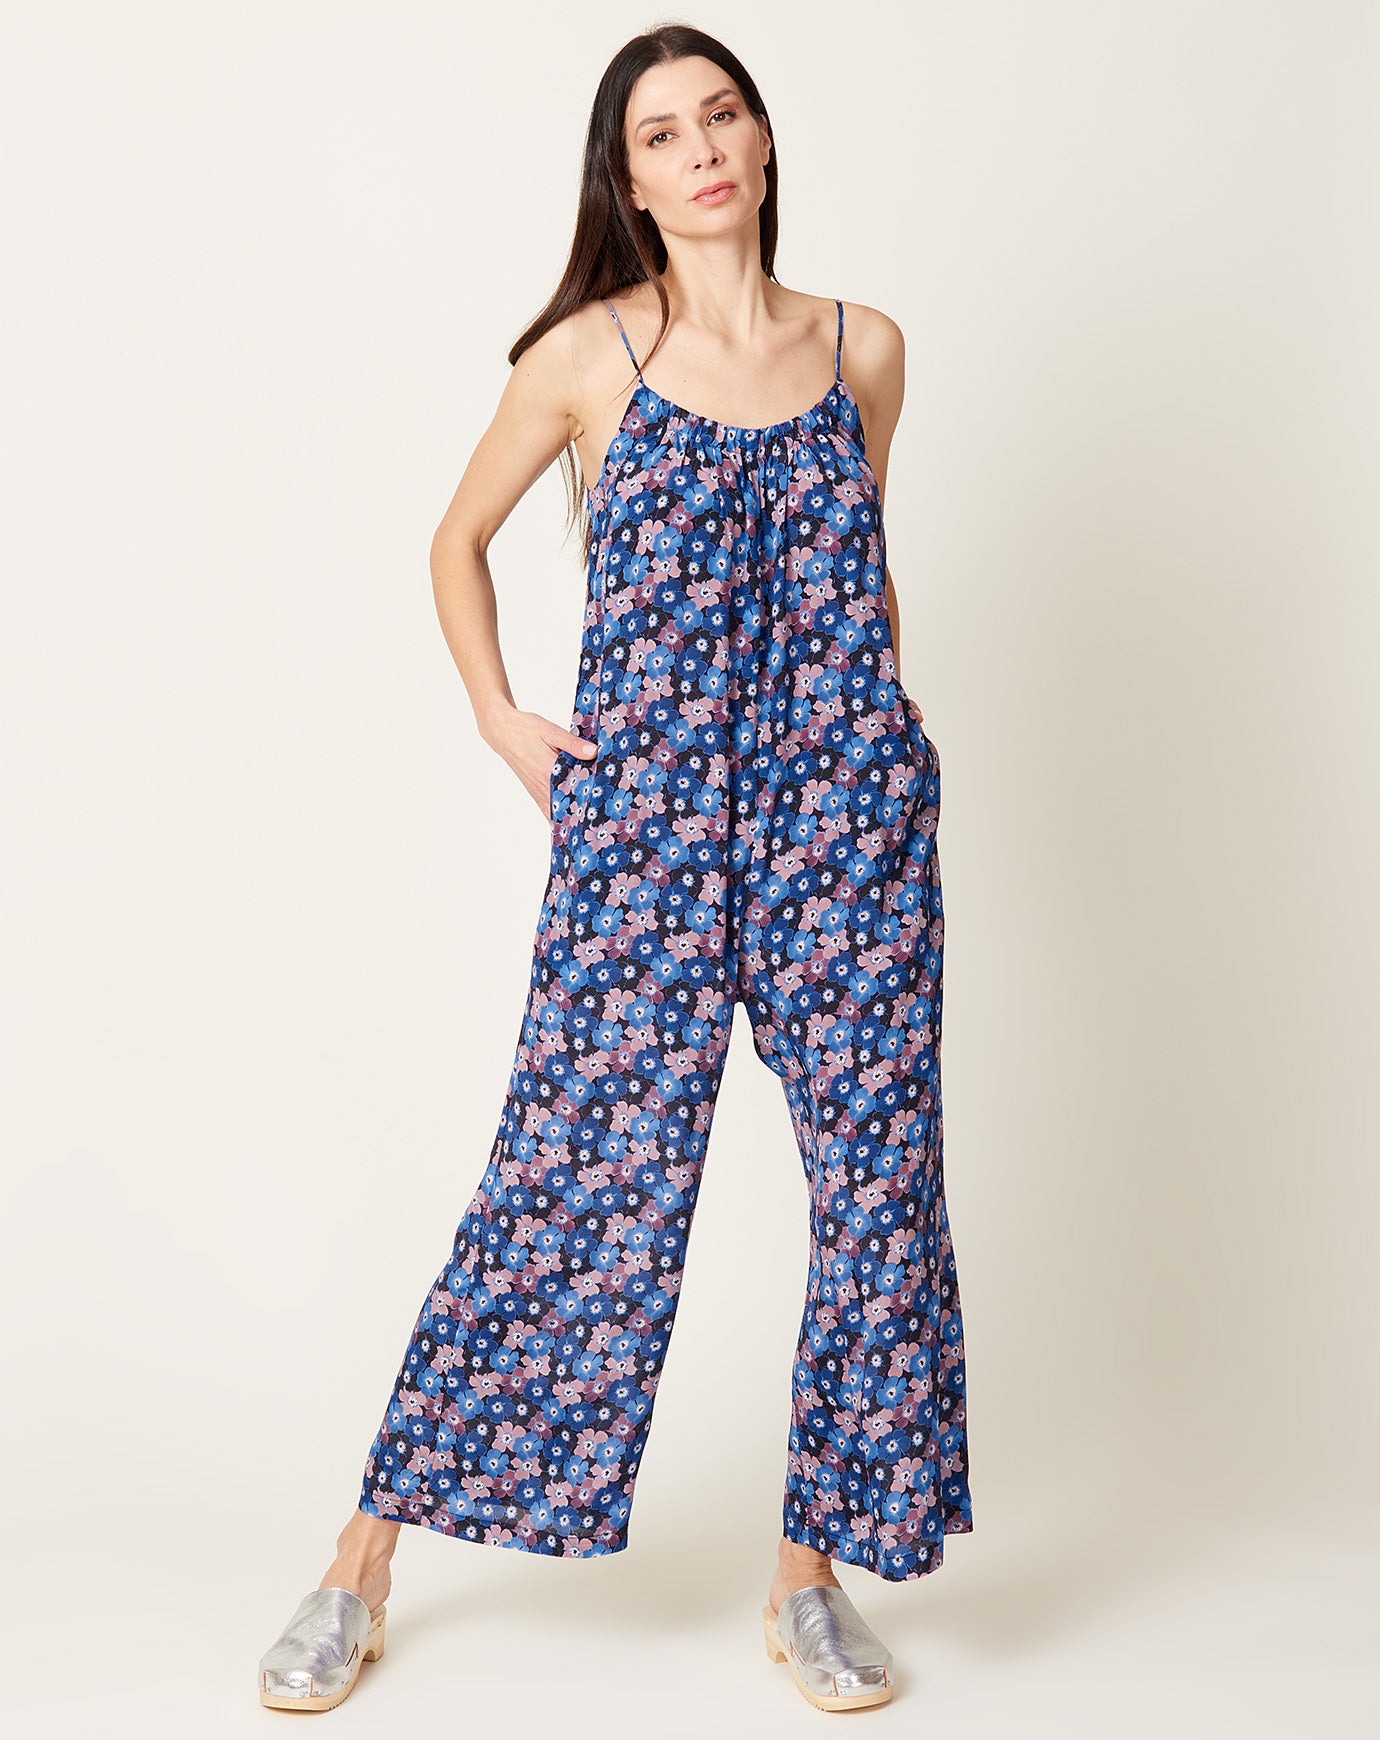 No. 6 Eve Jumpsuit in Royal Mauve Pansy